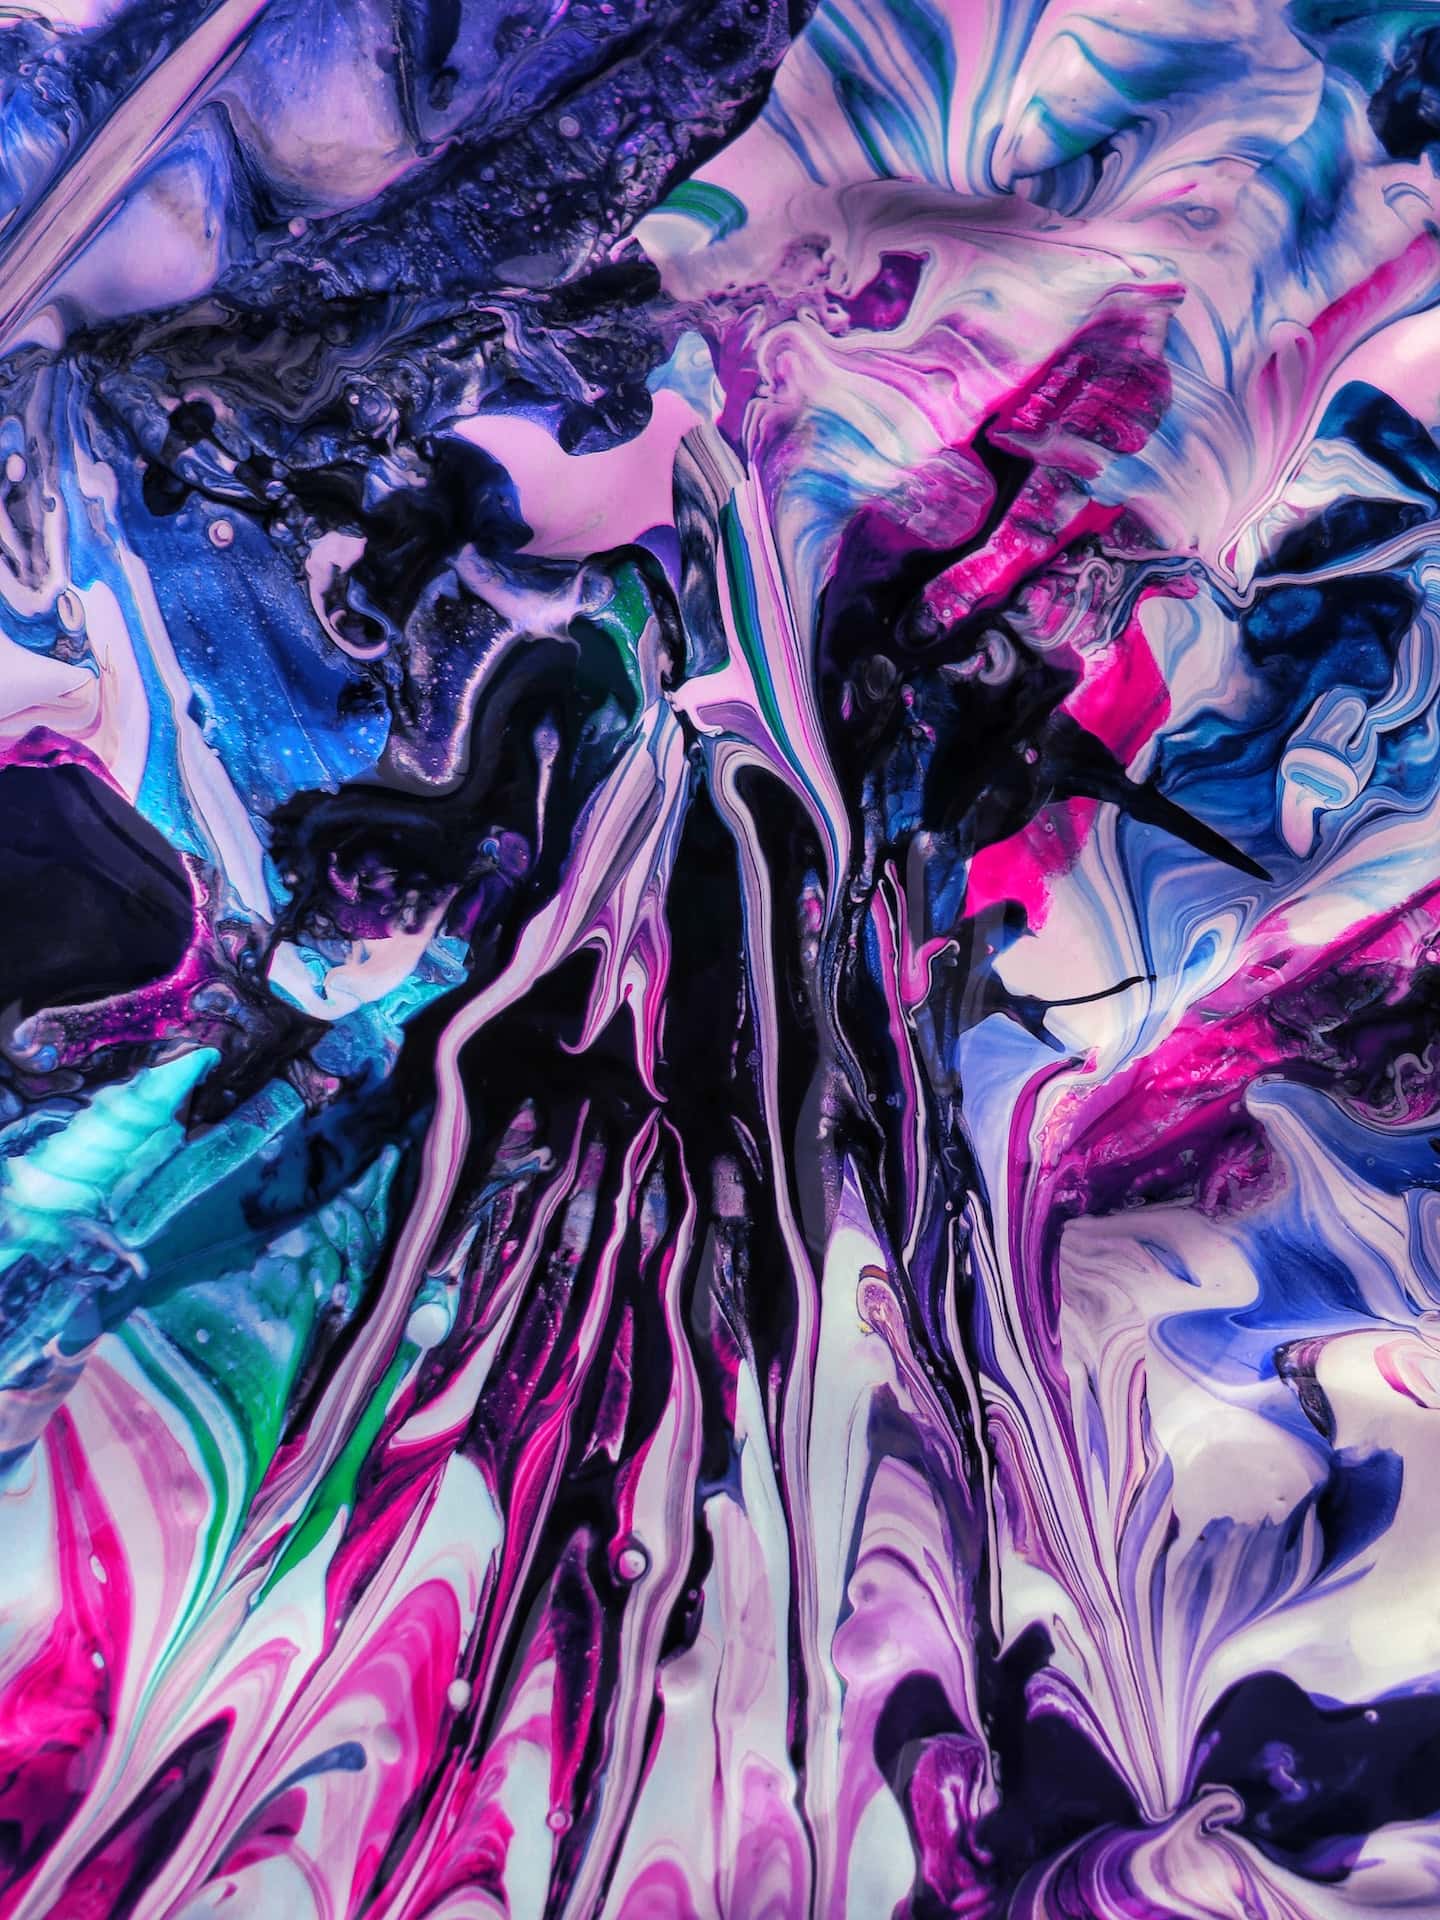 A close up of a liquid with purple, blue, and pink hues, exploring the impact of color psychology.